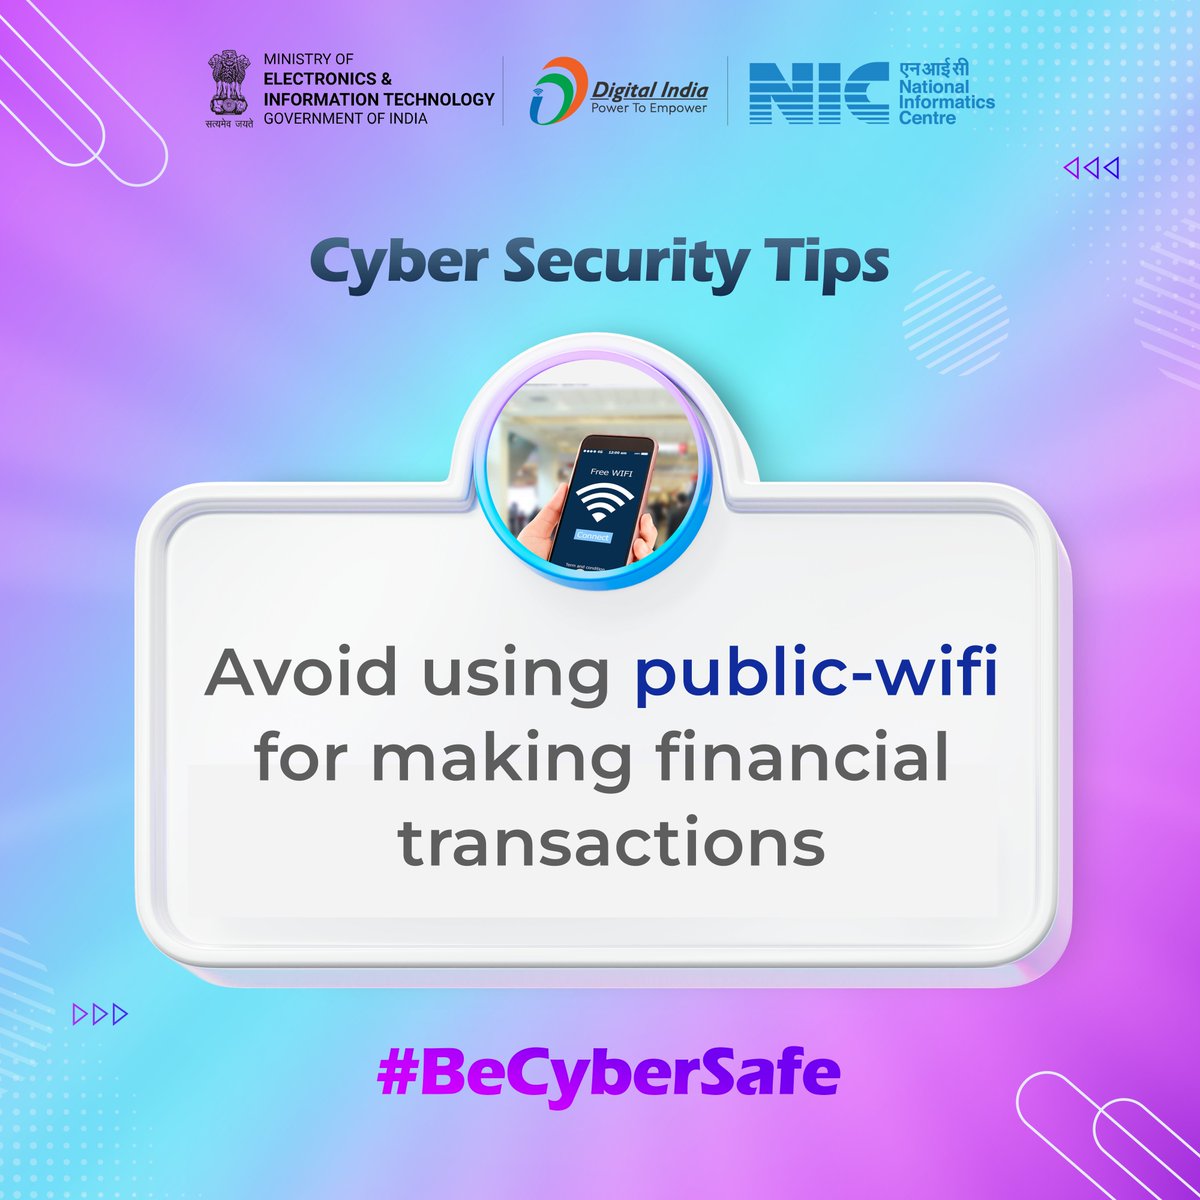 #CyberSecurityTips

Avoid using public #WiFi 🛜 for making financial transactions.

Courtesy: @SSOIndia 
#NICMeitY #CyberSecurityAwareness #CyberSecurity #BeSafeOnline